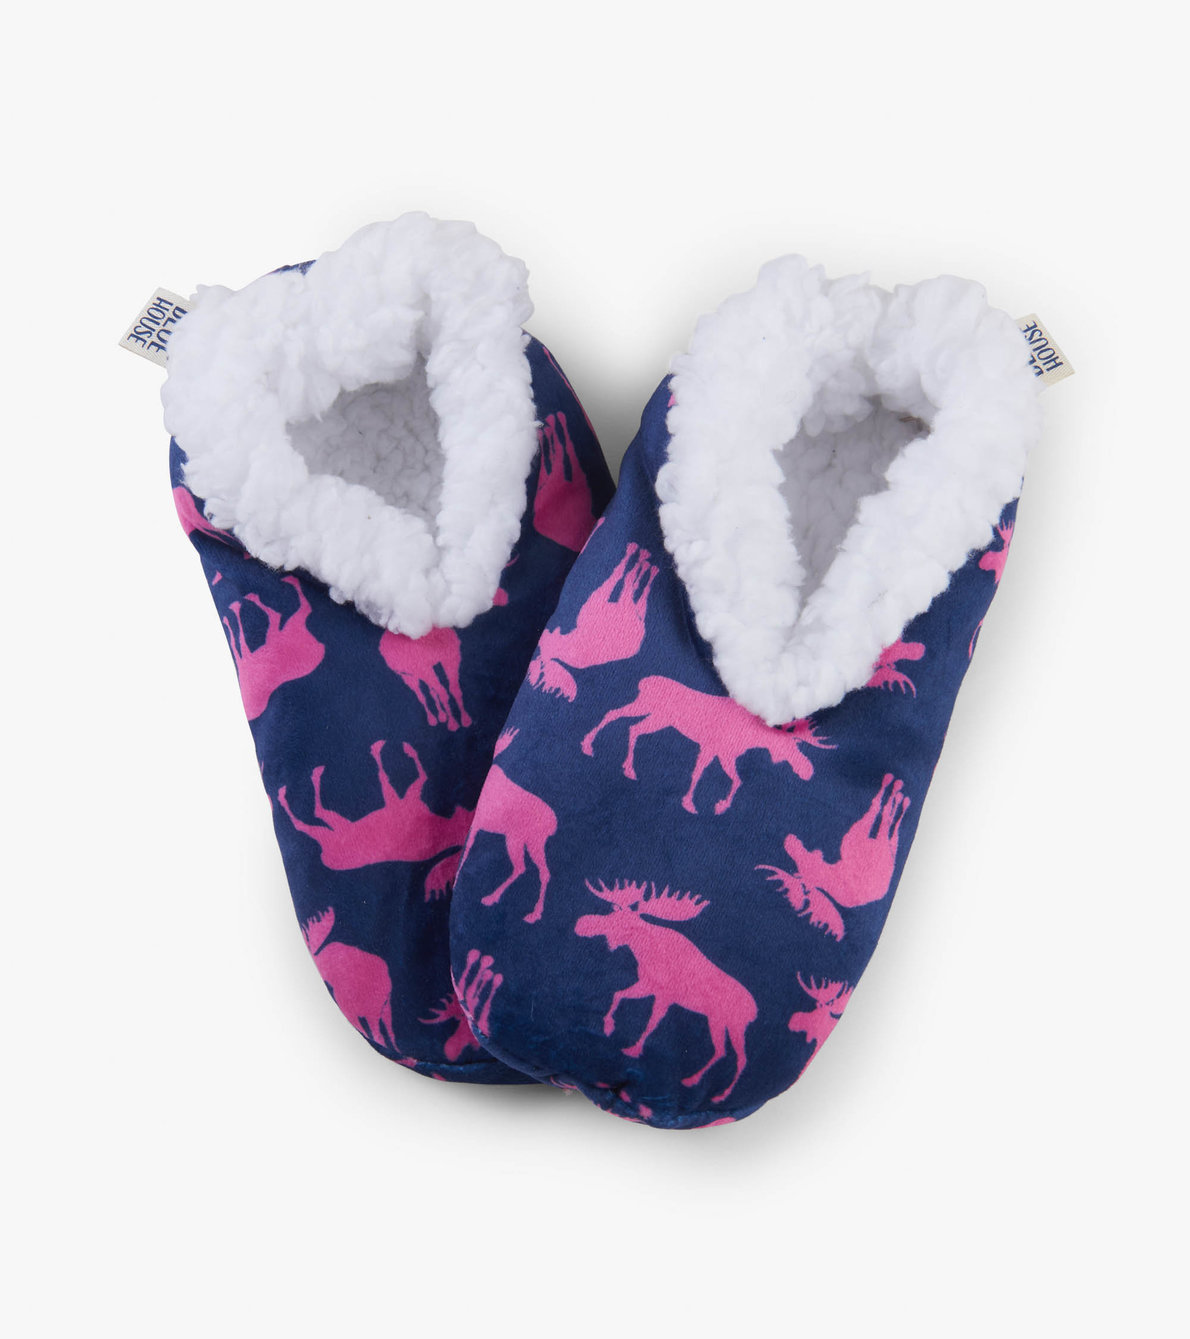 View larger image of Cottage Moose Women's Warm and Cozy Slippers